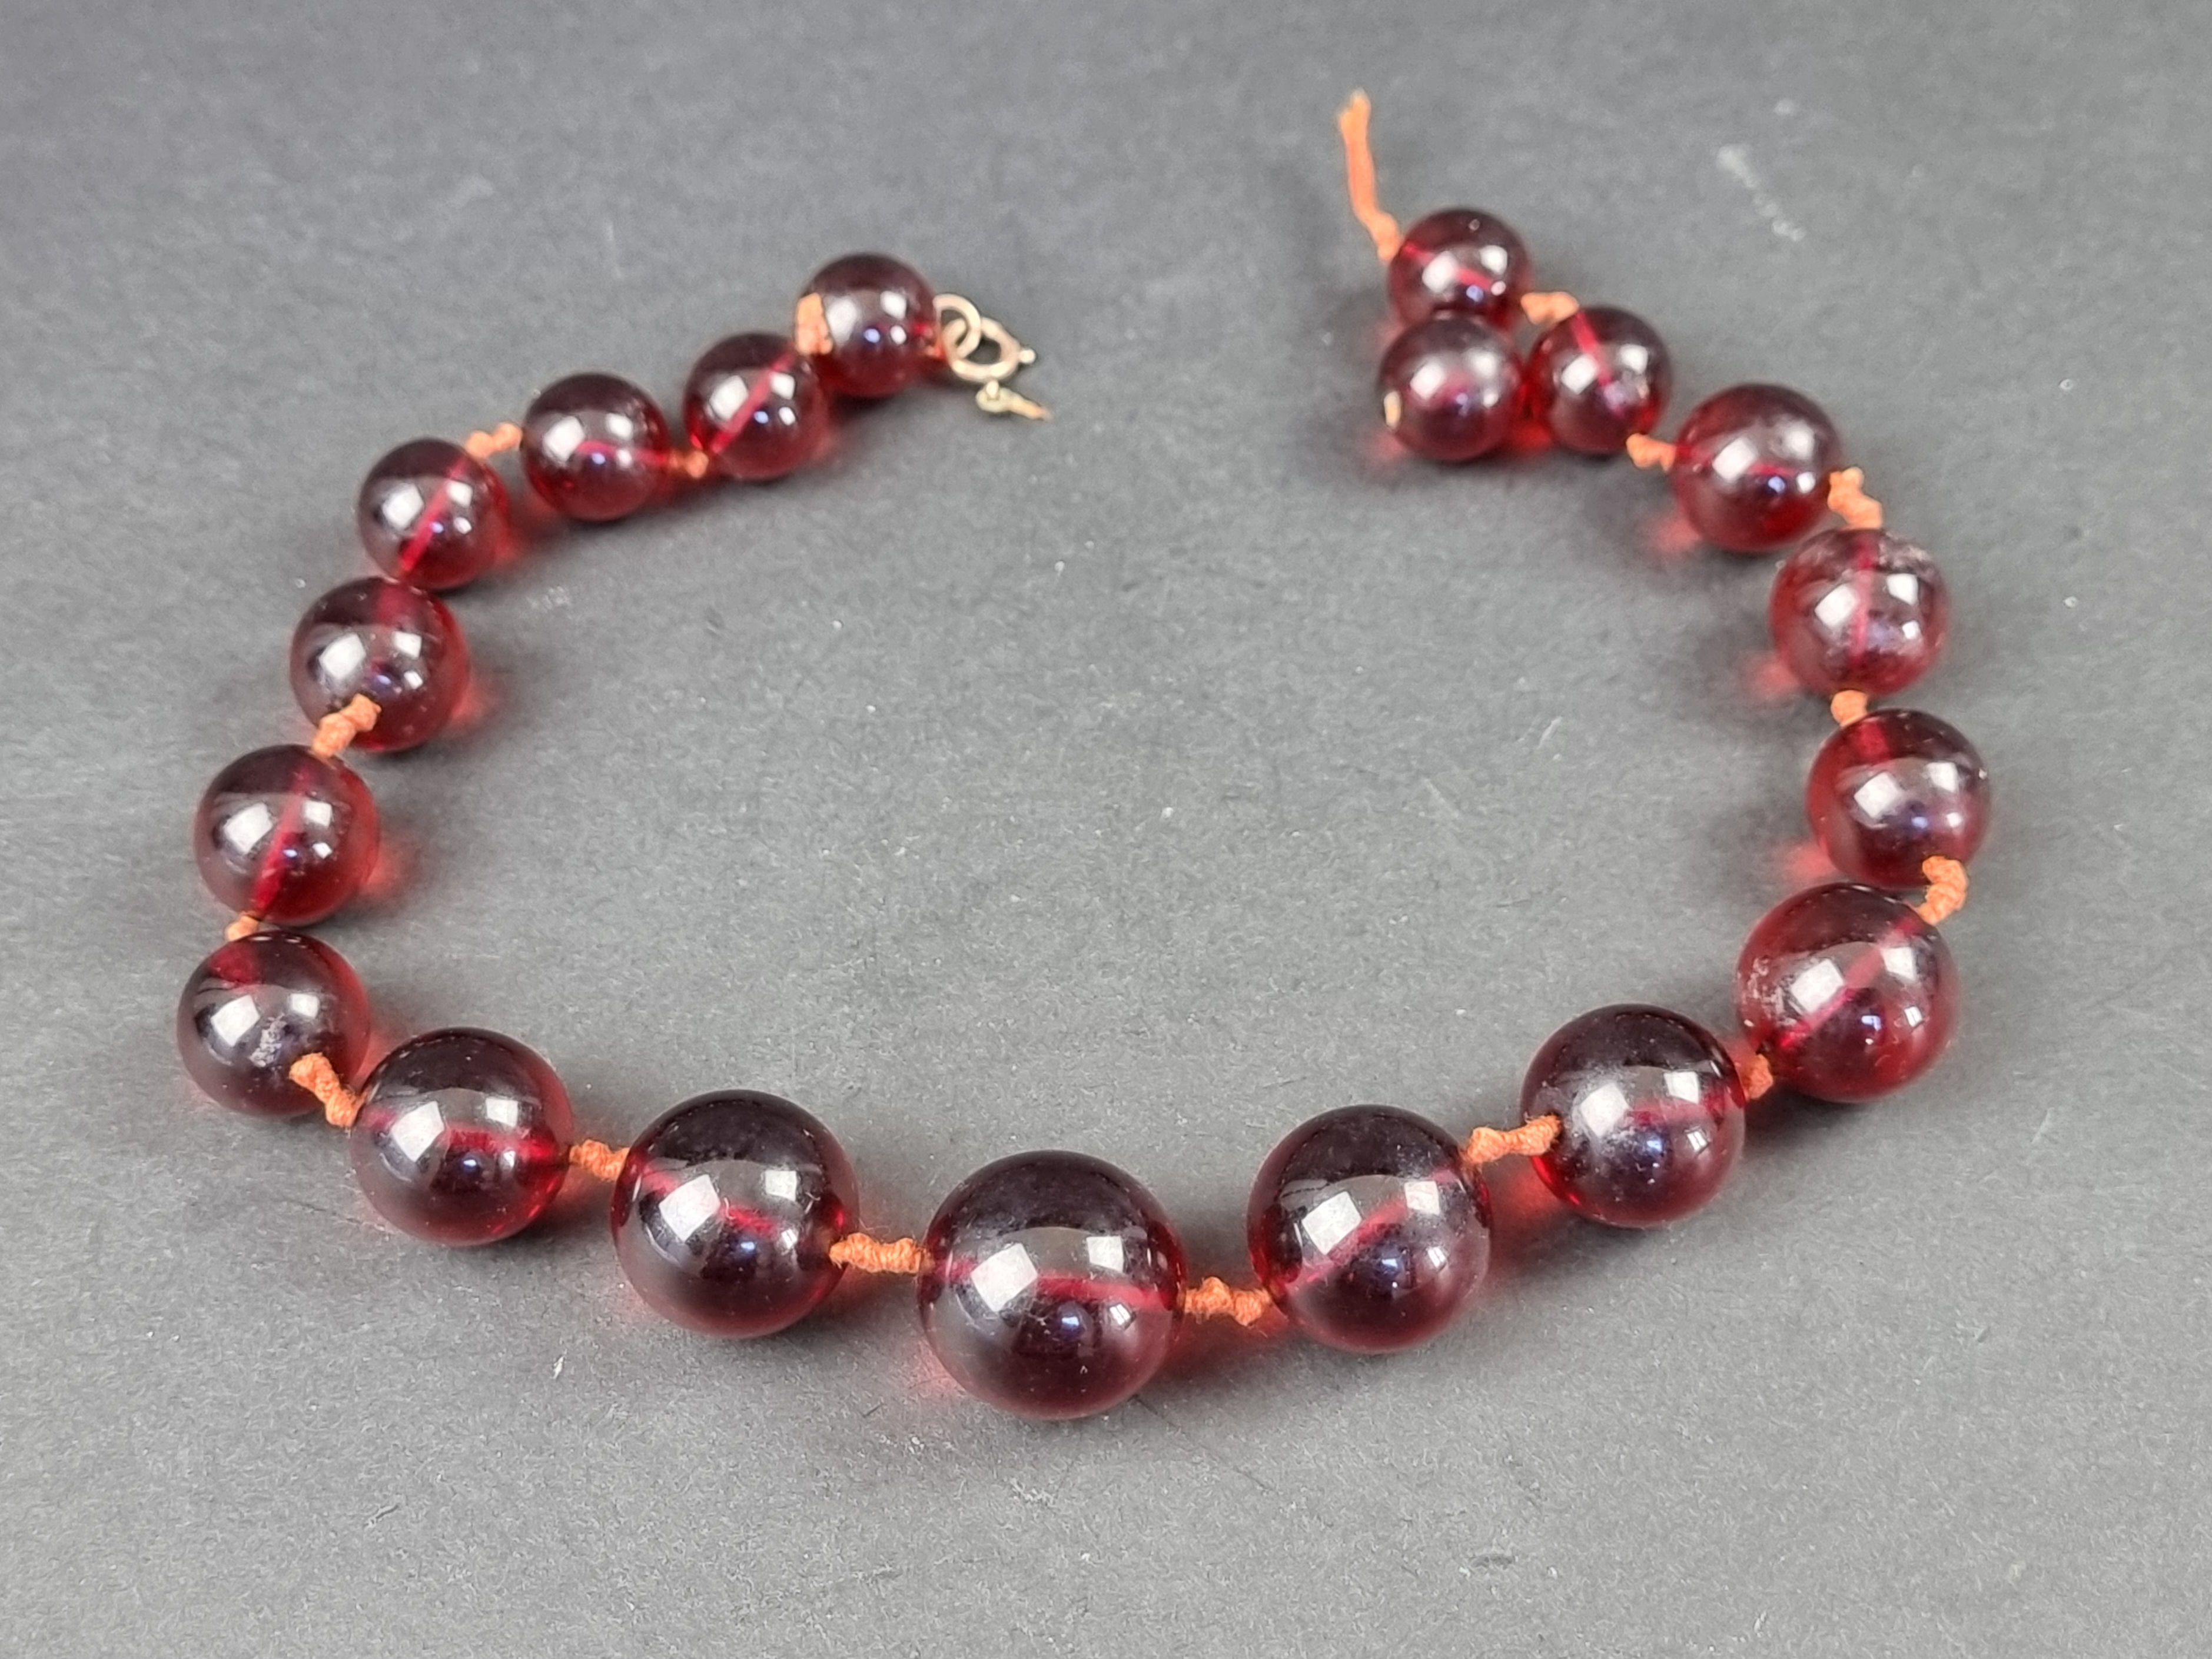 An amber style bead necklace, 44cm long.